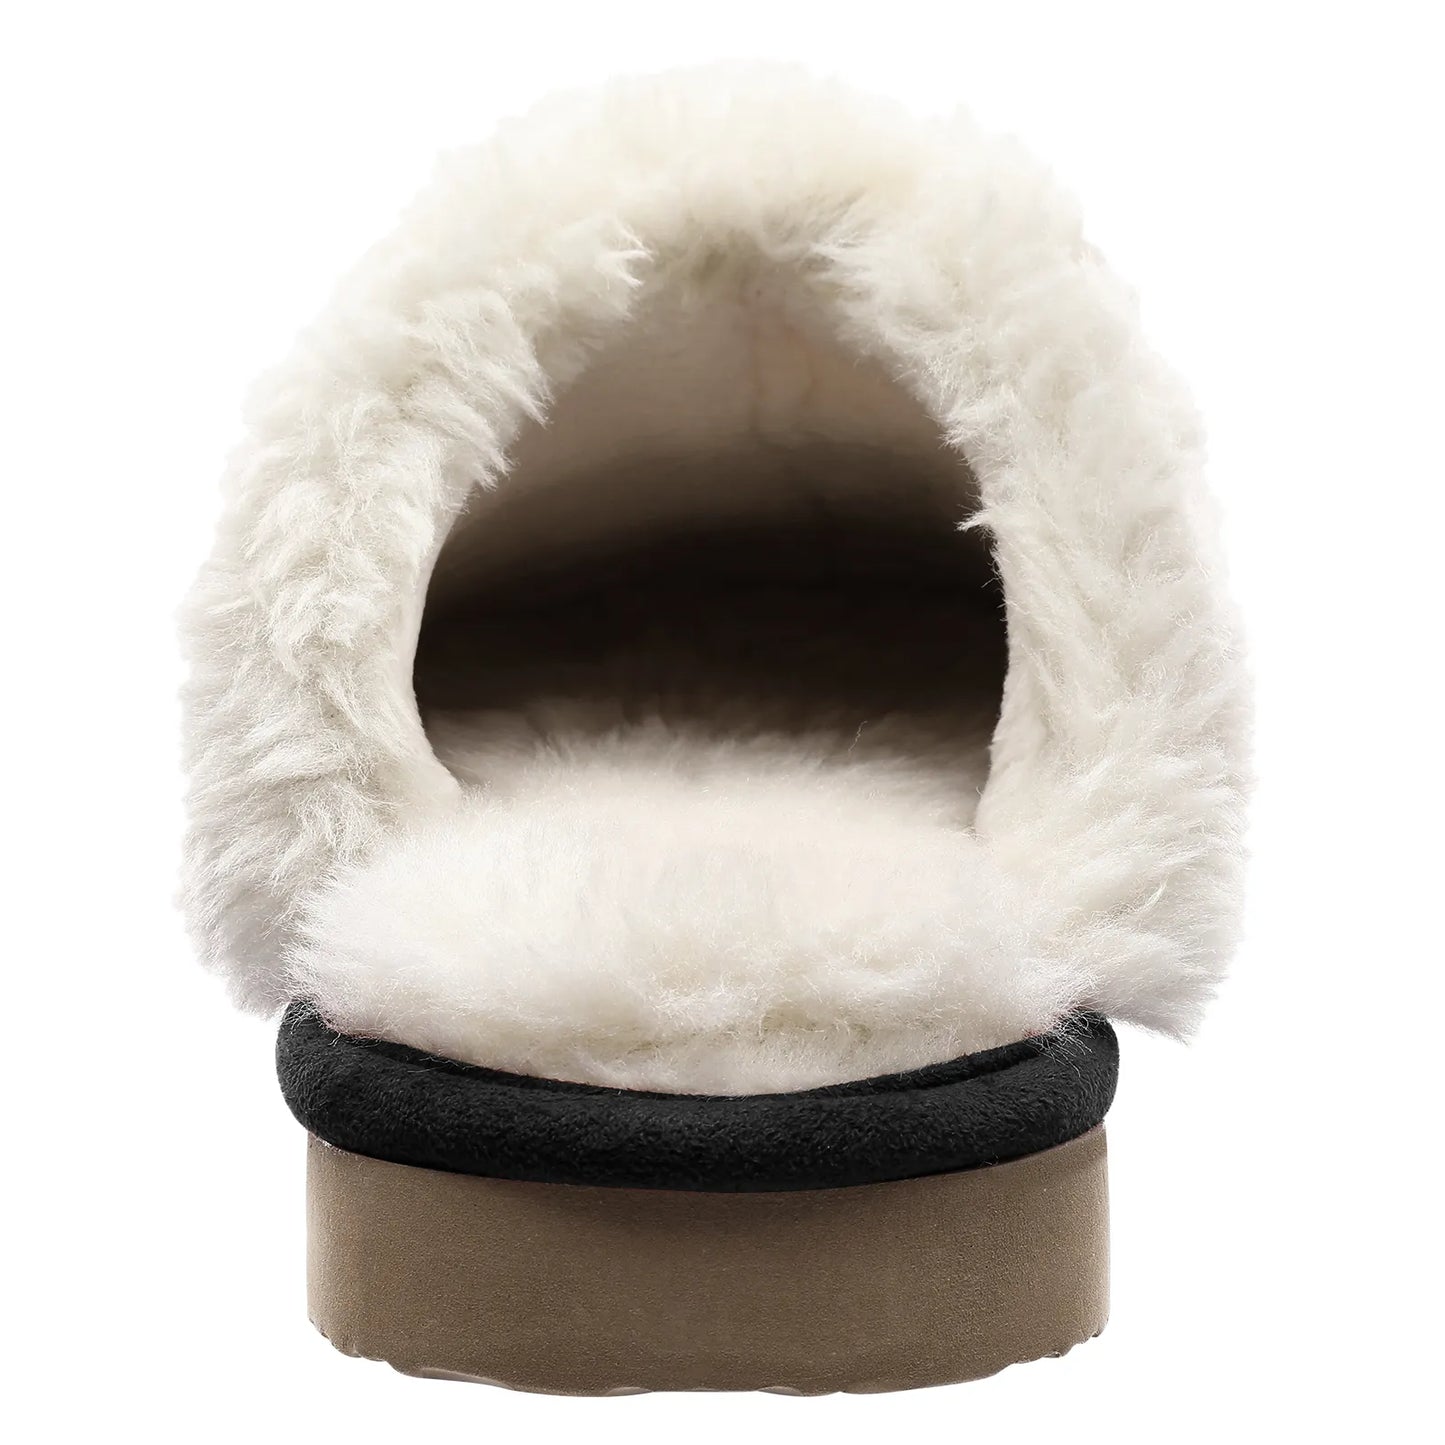 Home Fur Slippers Winter House Shoes